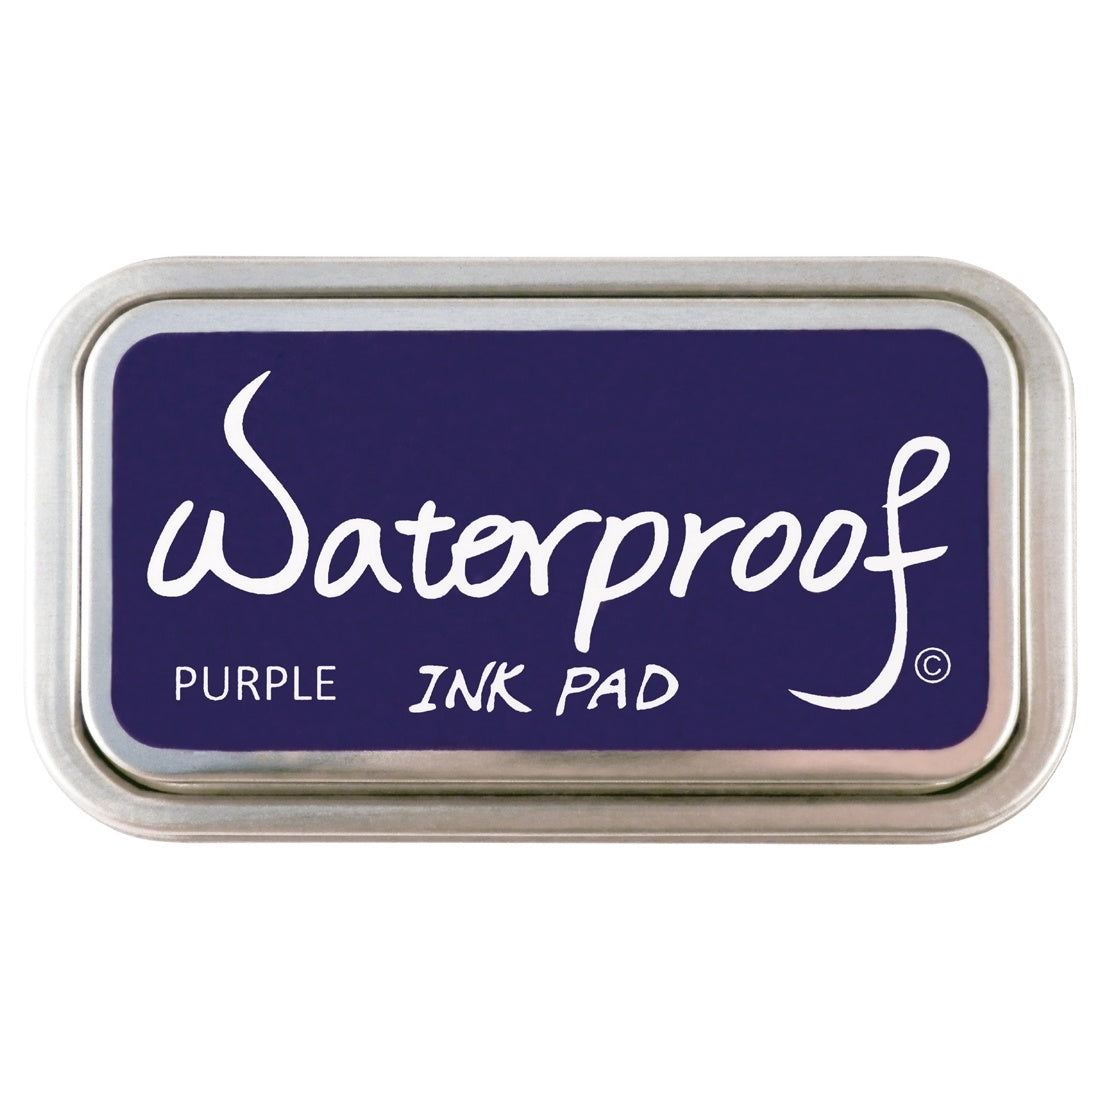 Ink Pads for Rubber Stamps;  Rubber Stamps Pads- Permanent;  Waterproof;  Stamp Pads for Card Making;  Scrapbooking Supplies;  Christmas Ink Stamps;  Hand Stamp Ink Pad;  Non-Toxic (5 Ink Pad Bundles)